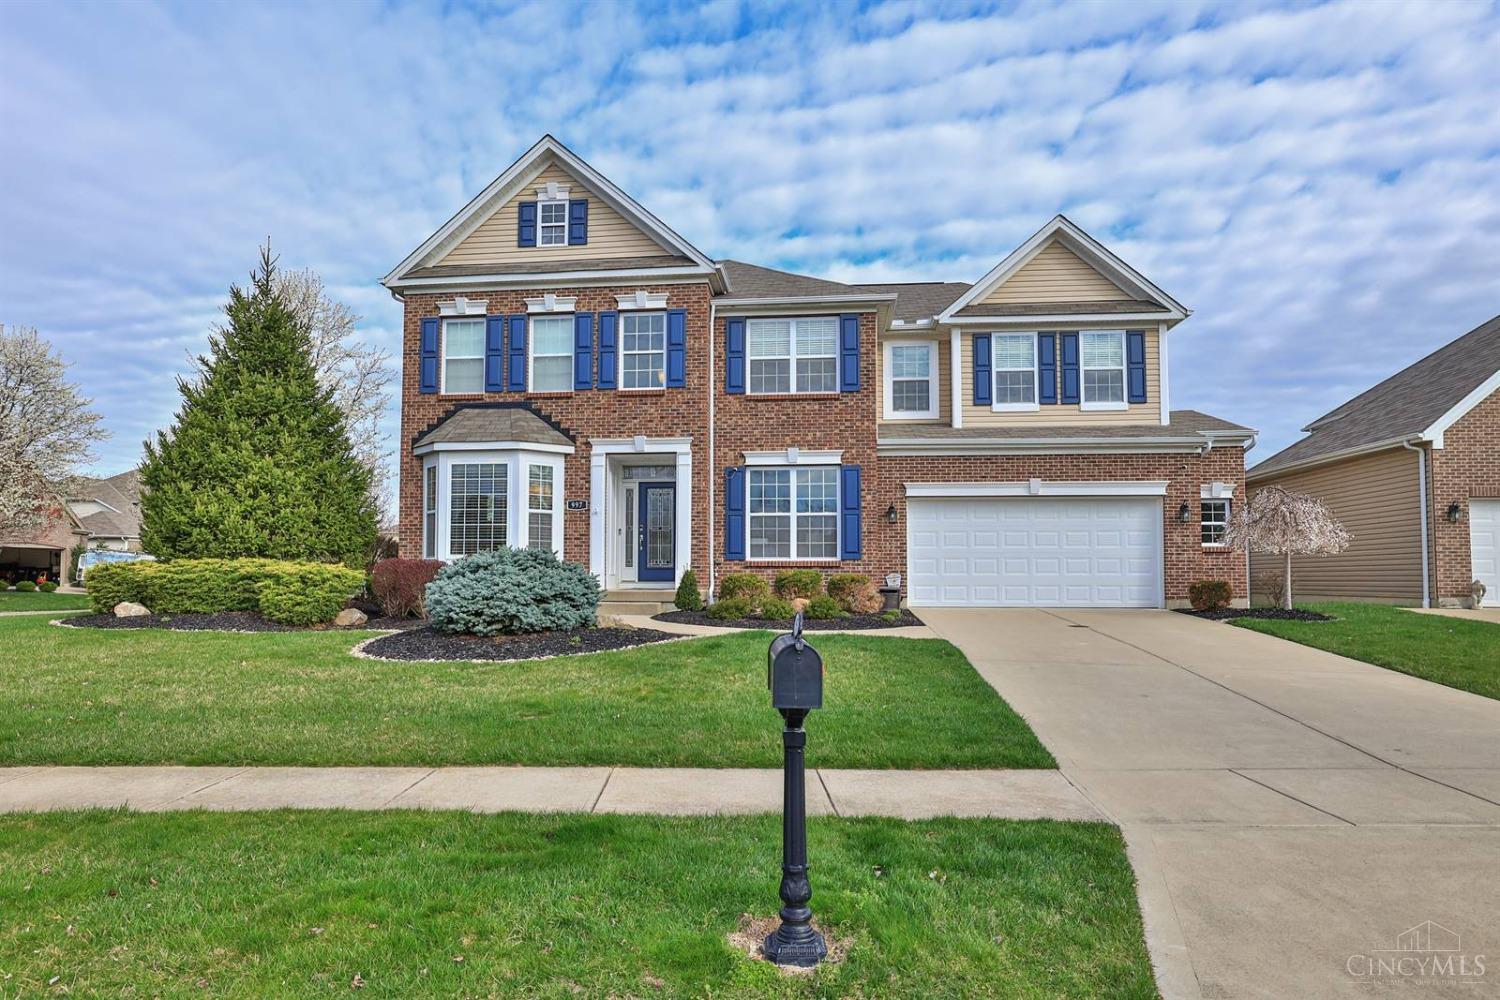 997 S Apple Gate Ct, Union Twp, OH 